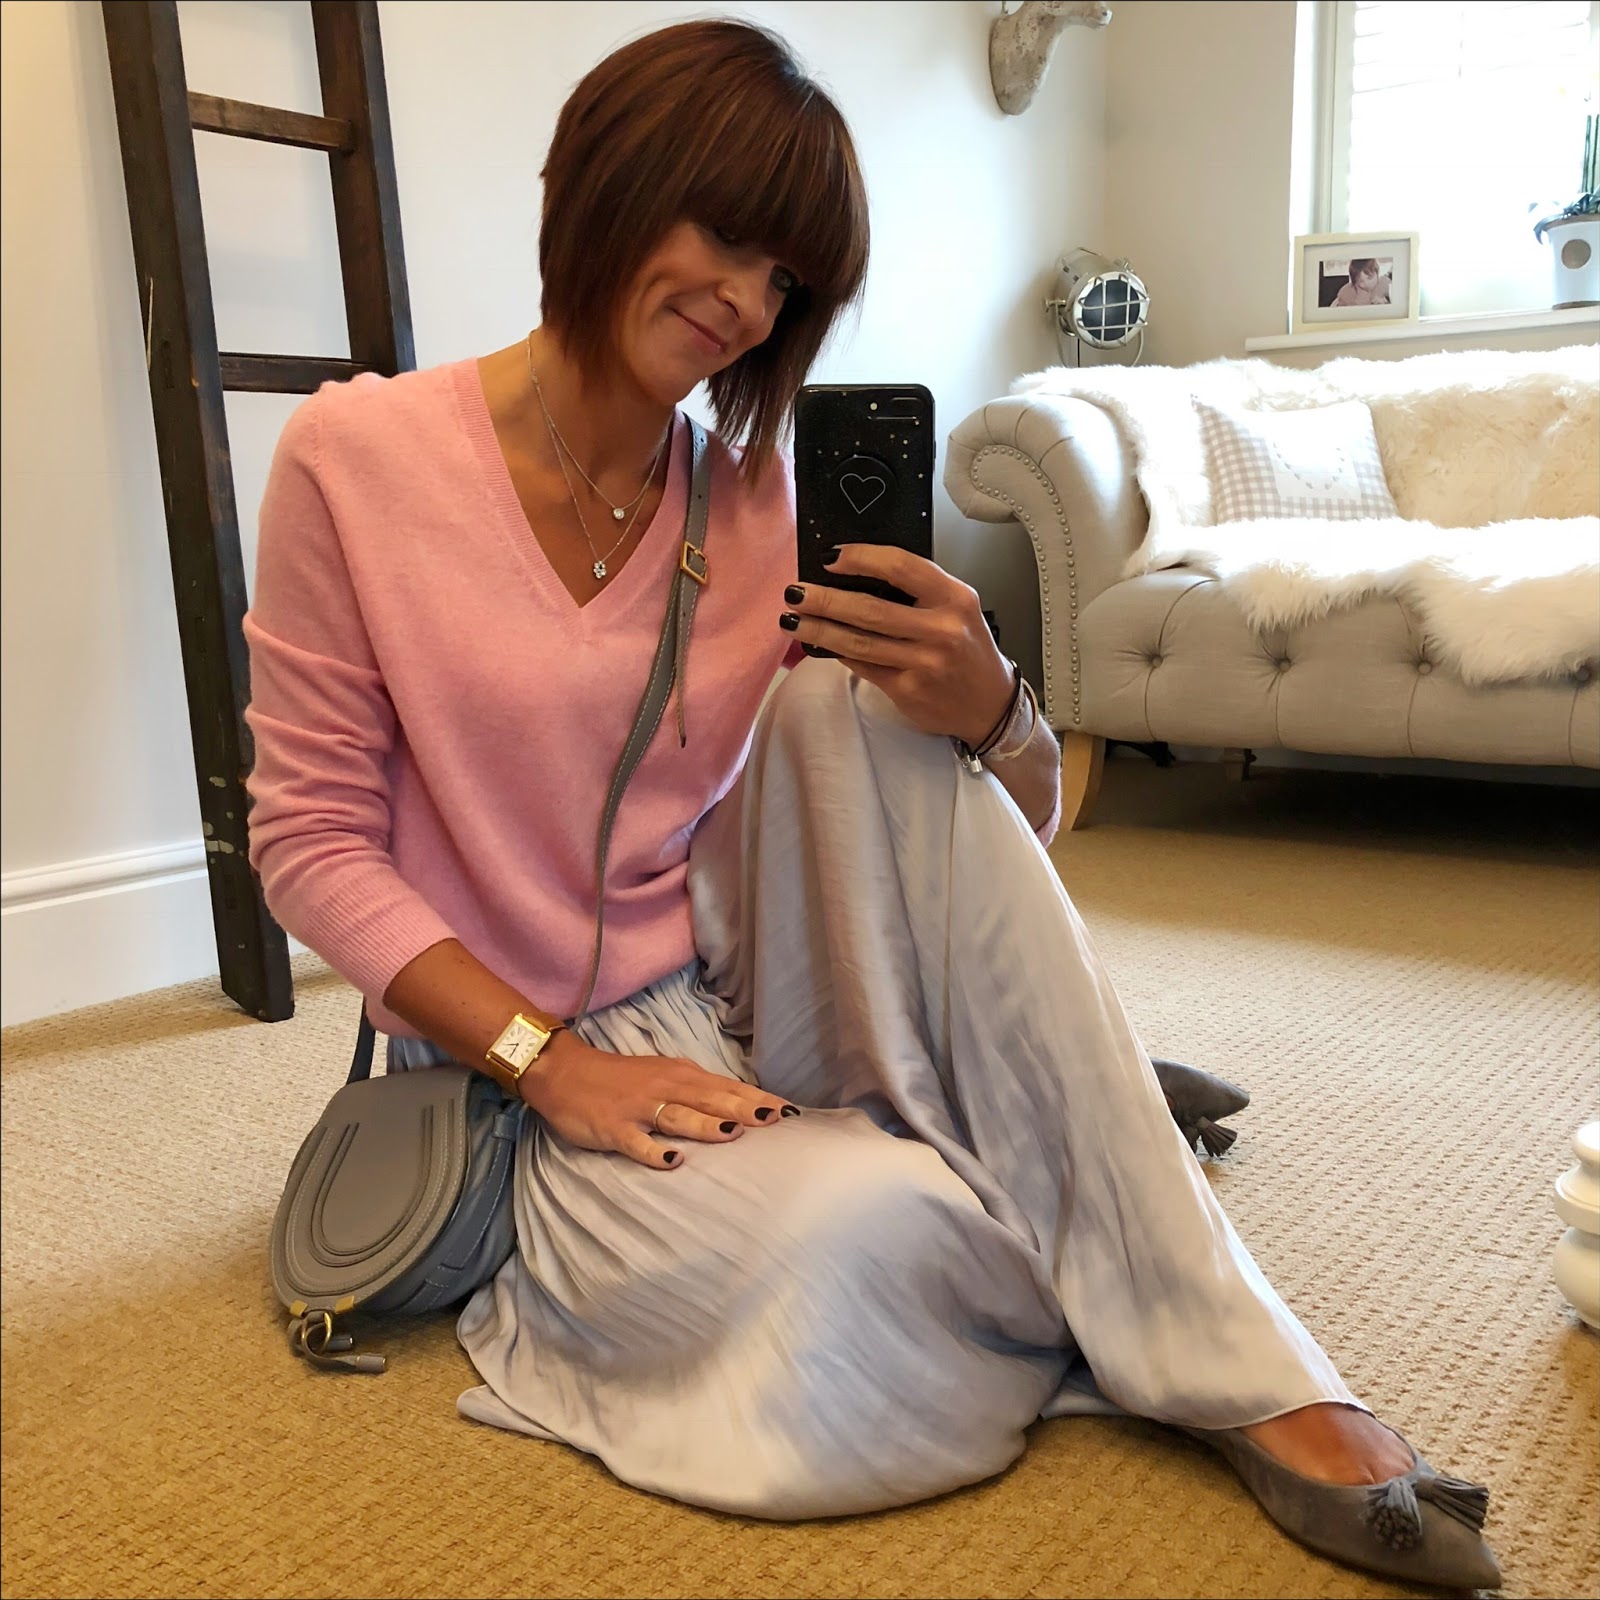 my midlife fashion, marks and spencer pure cashmere v neck jumper, chloe marcie cross body bag, massimo dutti soft gathered maxi skirt with side splits, j crew suede tassel pointed flats